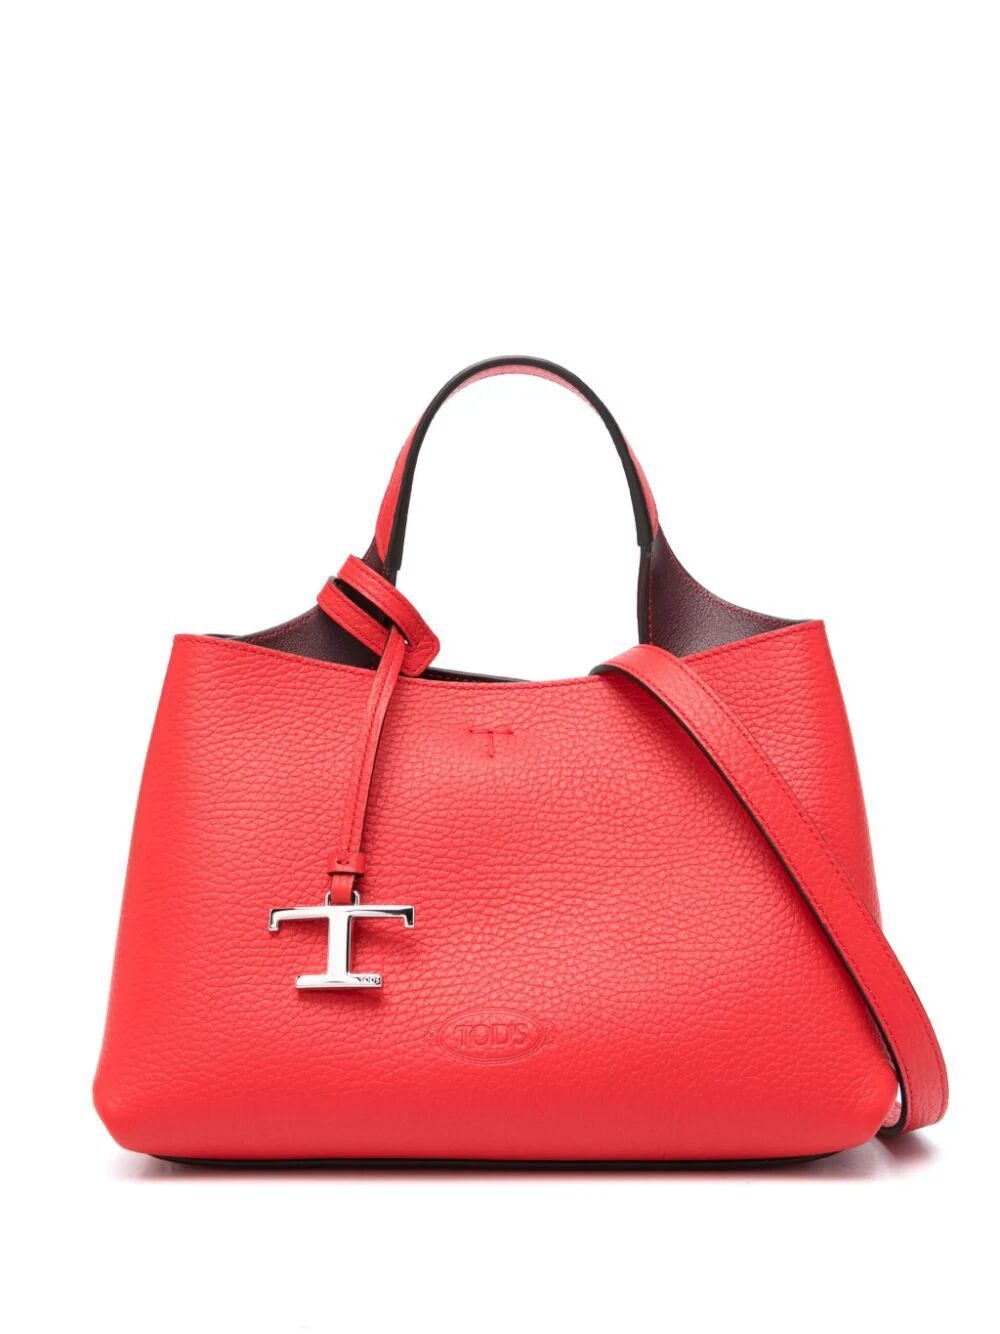 TOD'S Red Leather Tote Handbag for Women - SS24 Collection